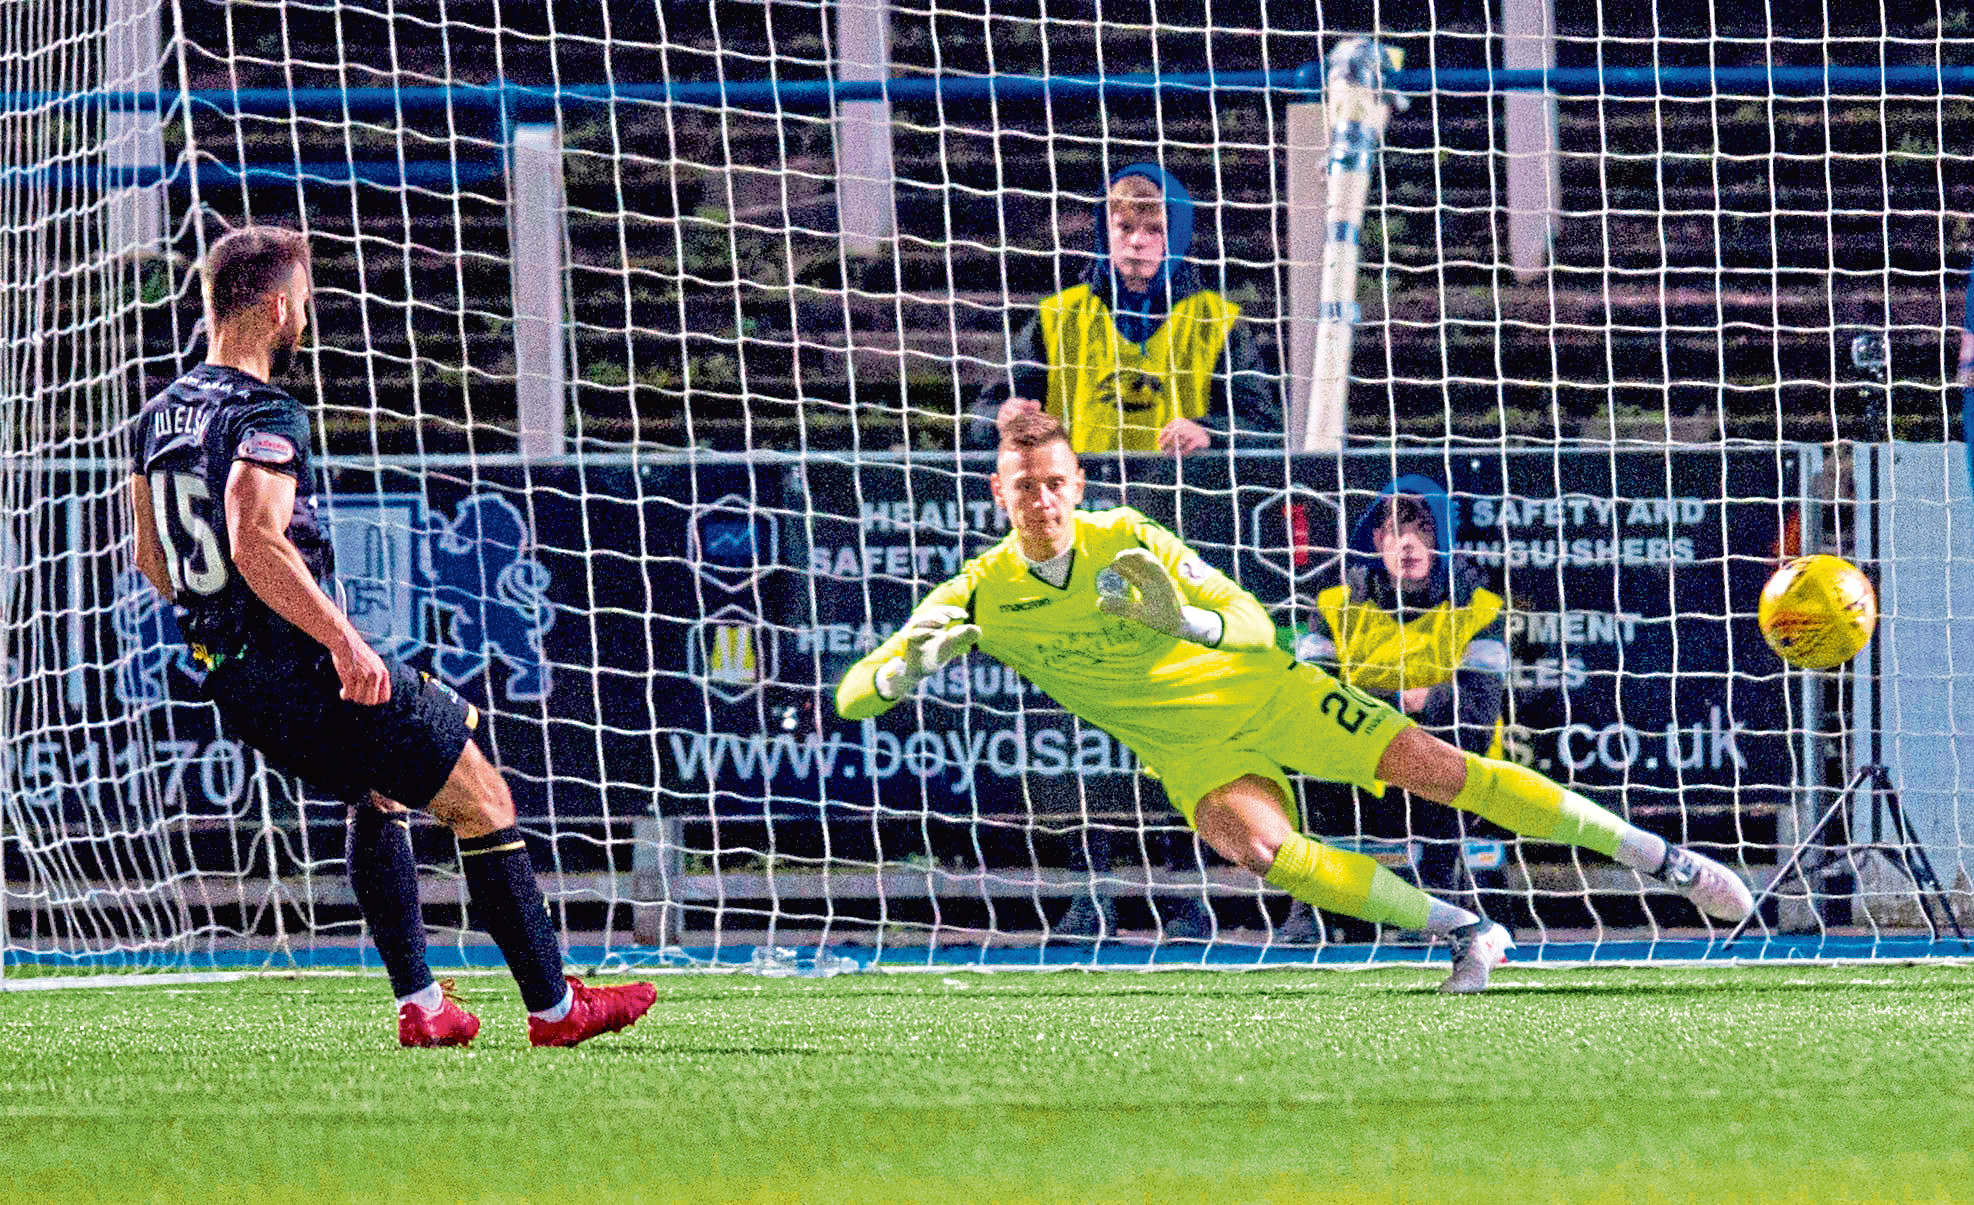 17/11/18 LADBROKES CHAMPIONSHIP
PALMERSTON PARK - DUMFRIES
QOTS V INVERNESS CT (3-3)
Inverness CT's Sean Welsh levels the scoring from the penalty spot